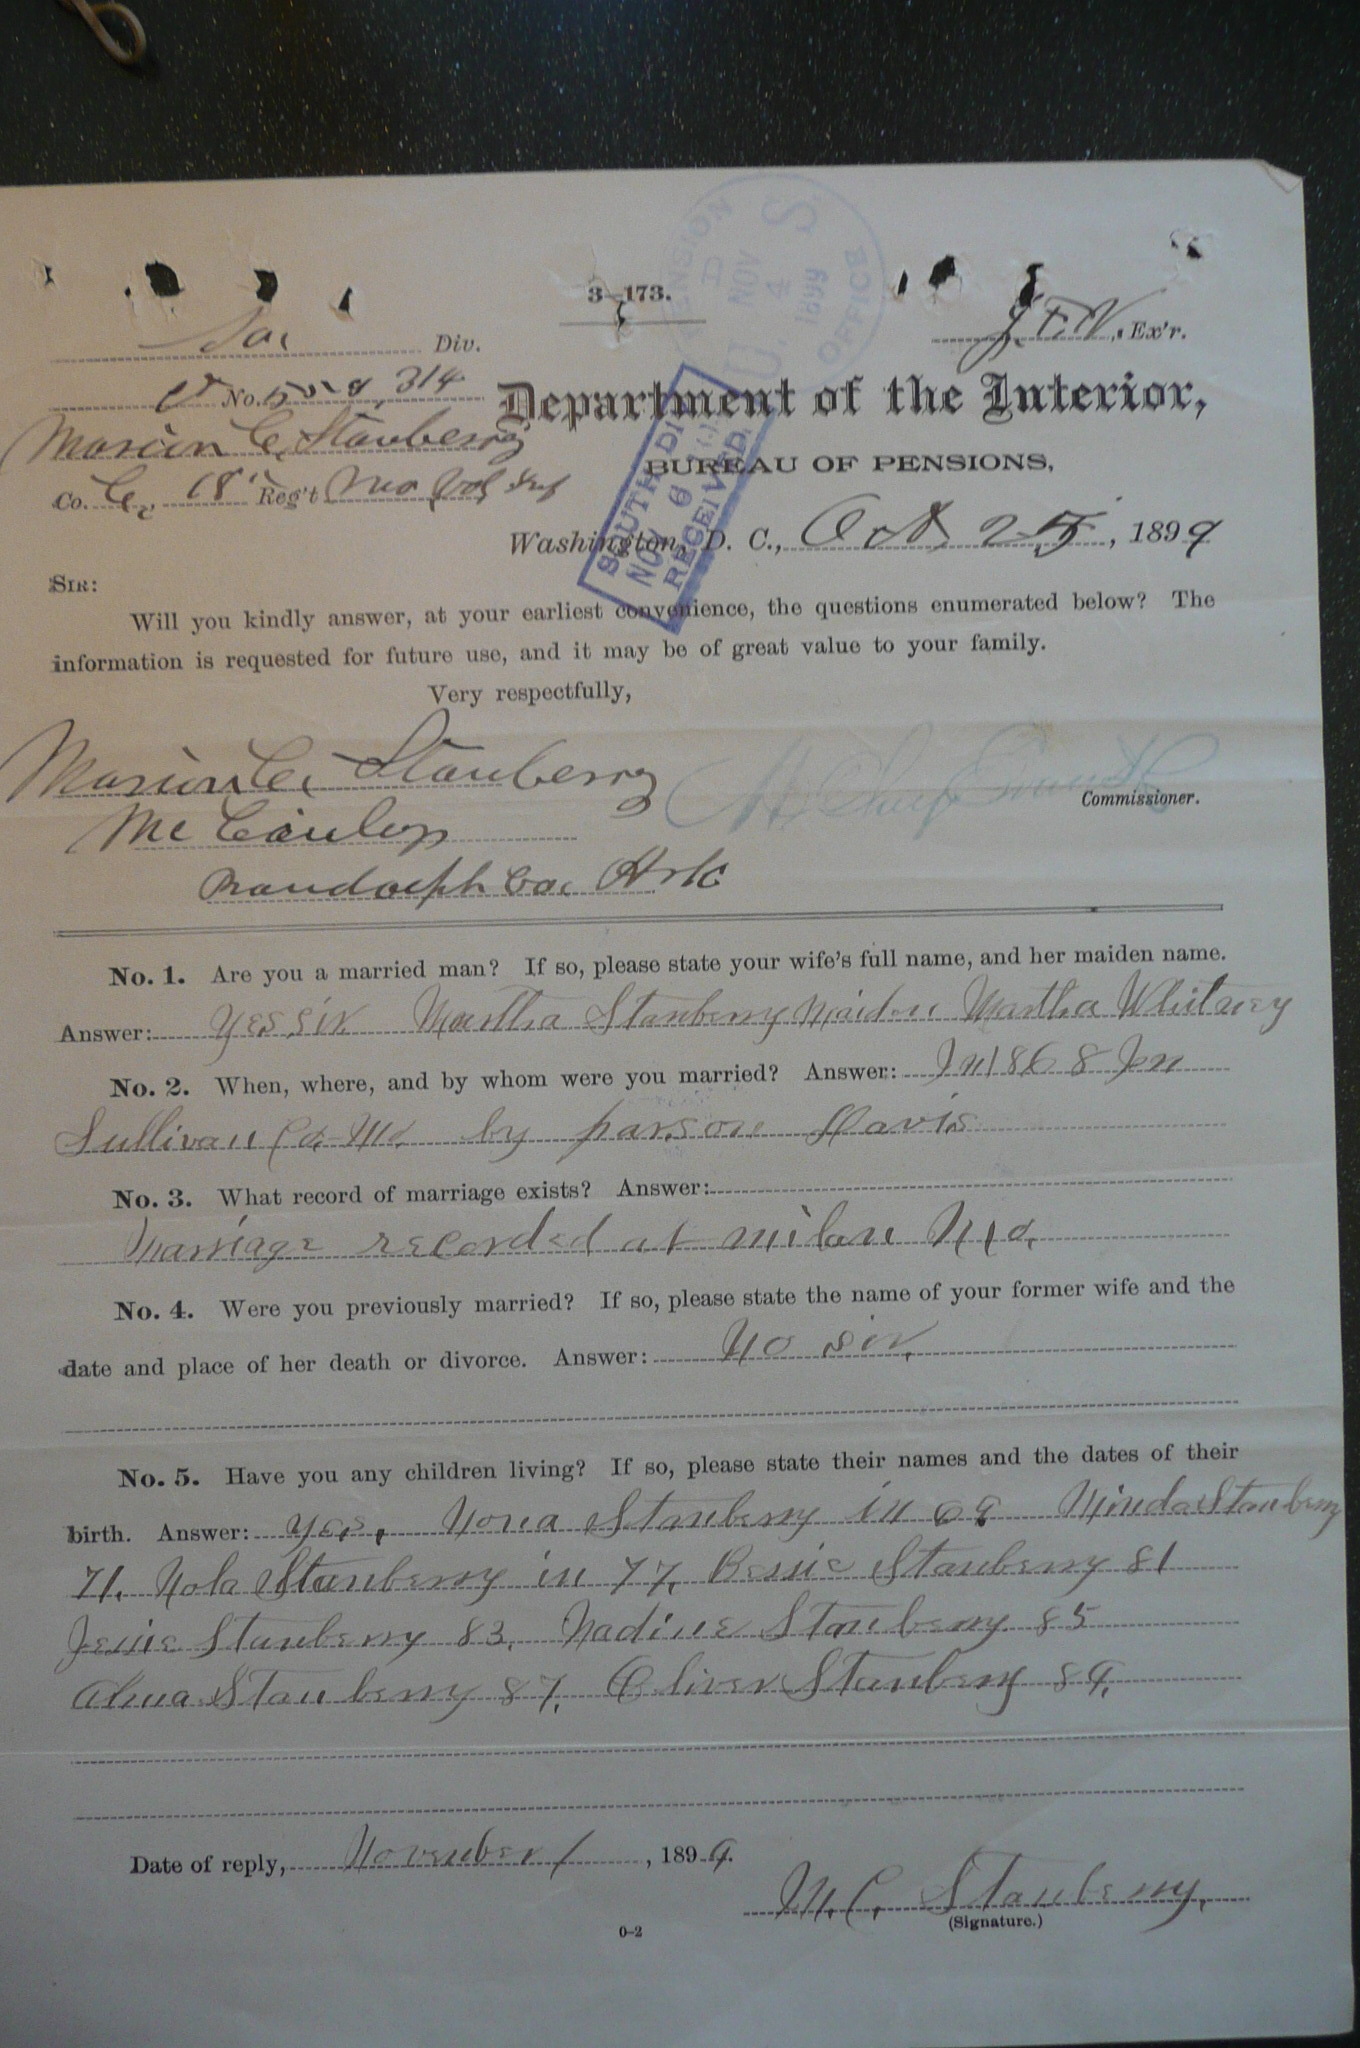 Reply to Inquiry, 1899